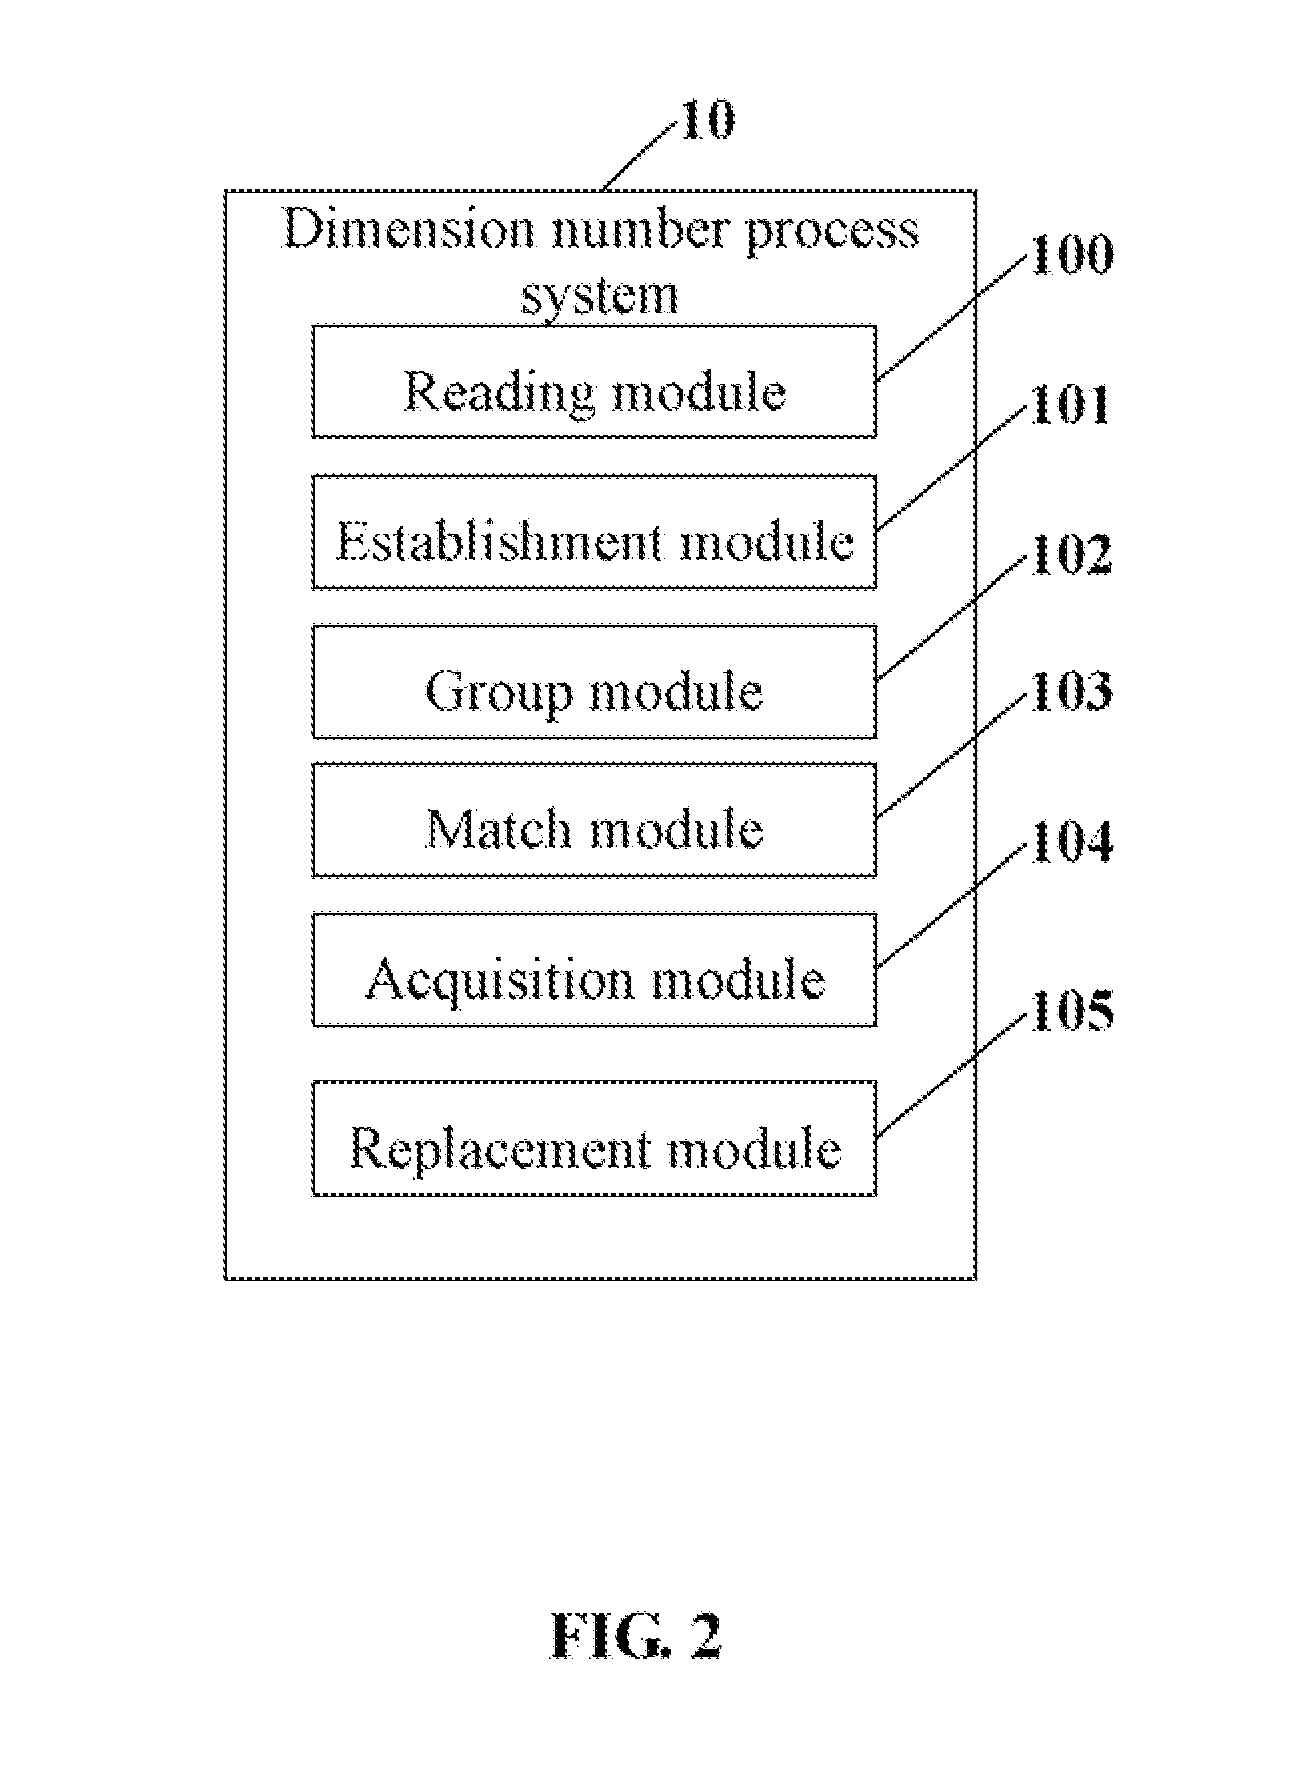 Computing device, storage medium and method for processing dimension numbers using the computing device